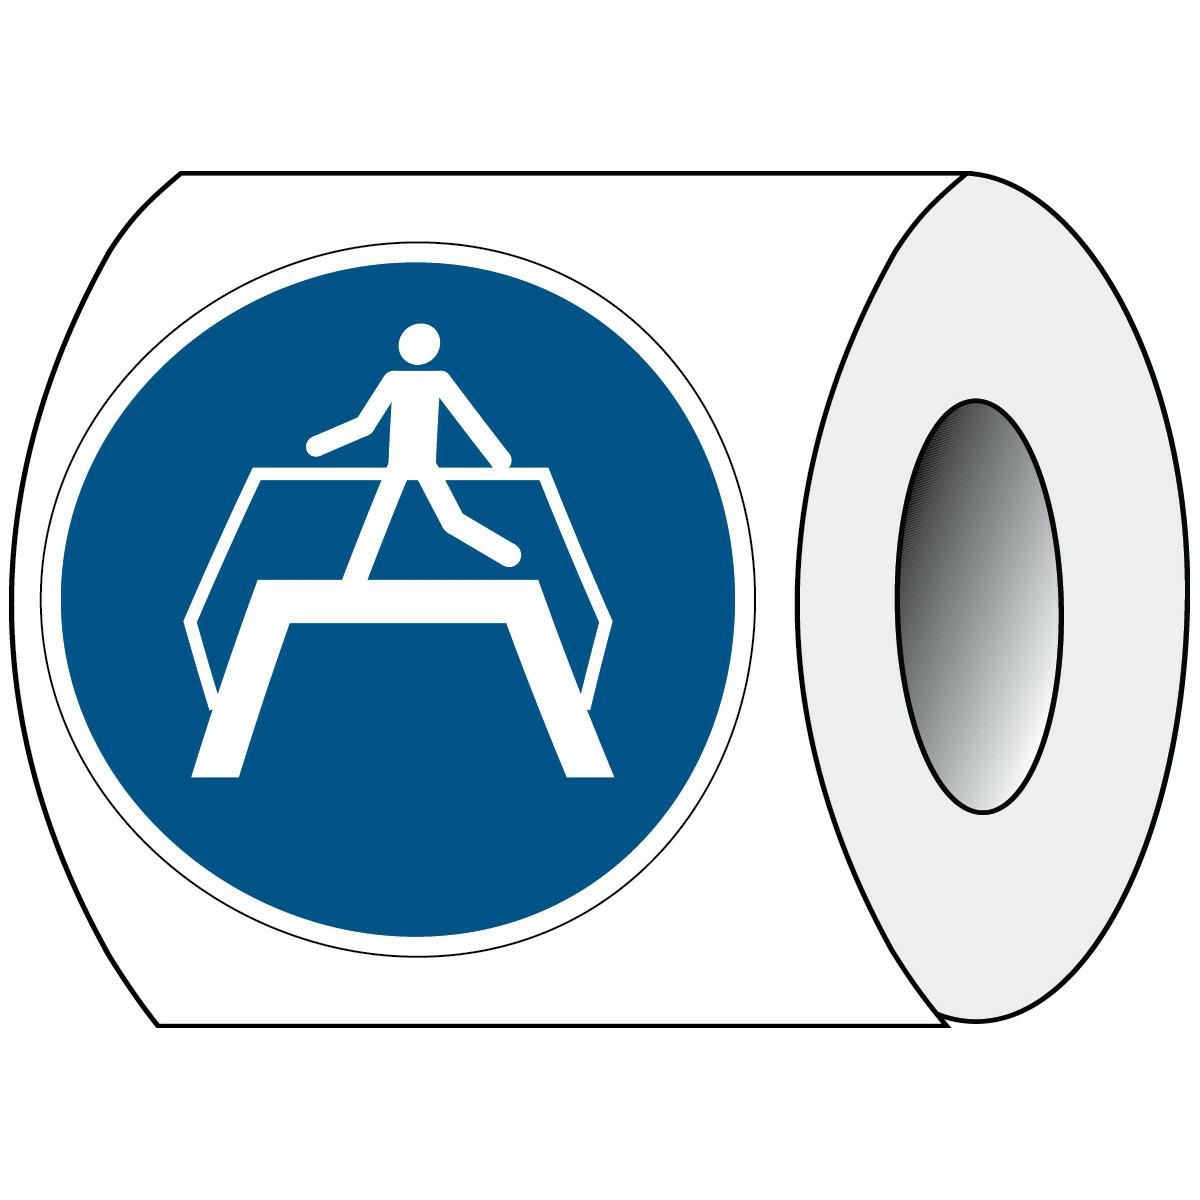 Brady PIC M023-DIA 025-PE-ROLL1 W128401422 ISO Safety Sign - Use 